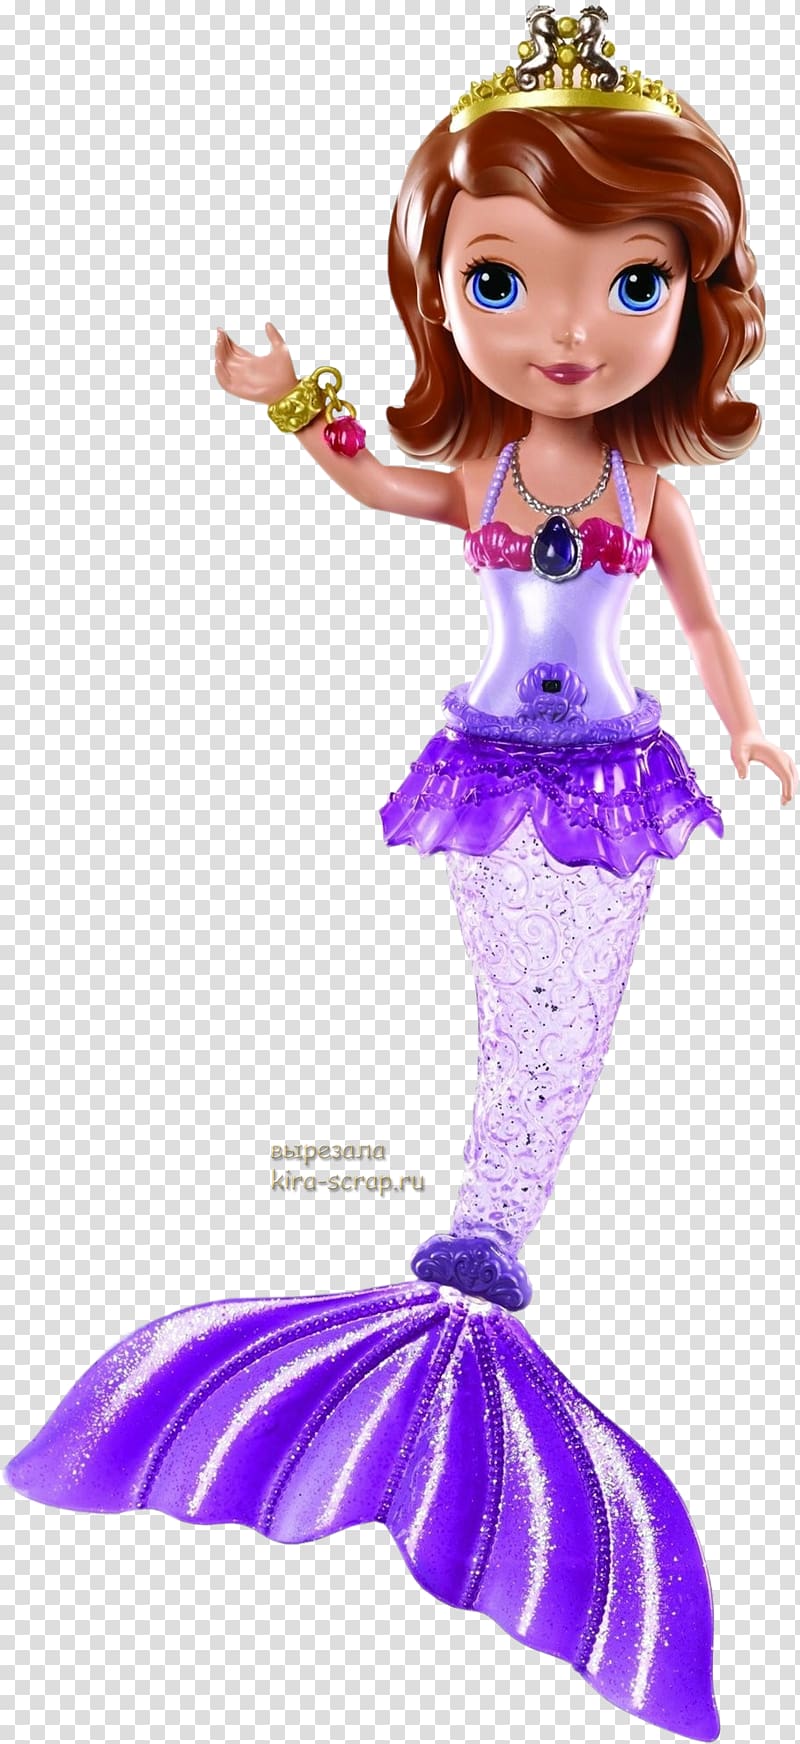 Sofia the First Amazon.com Doll Toy Mermaid, sofia transparent background PNG clipart